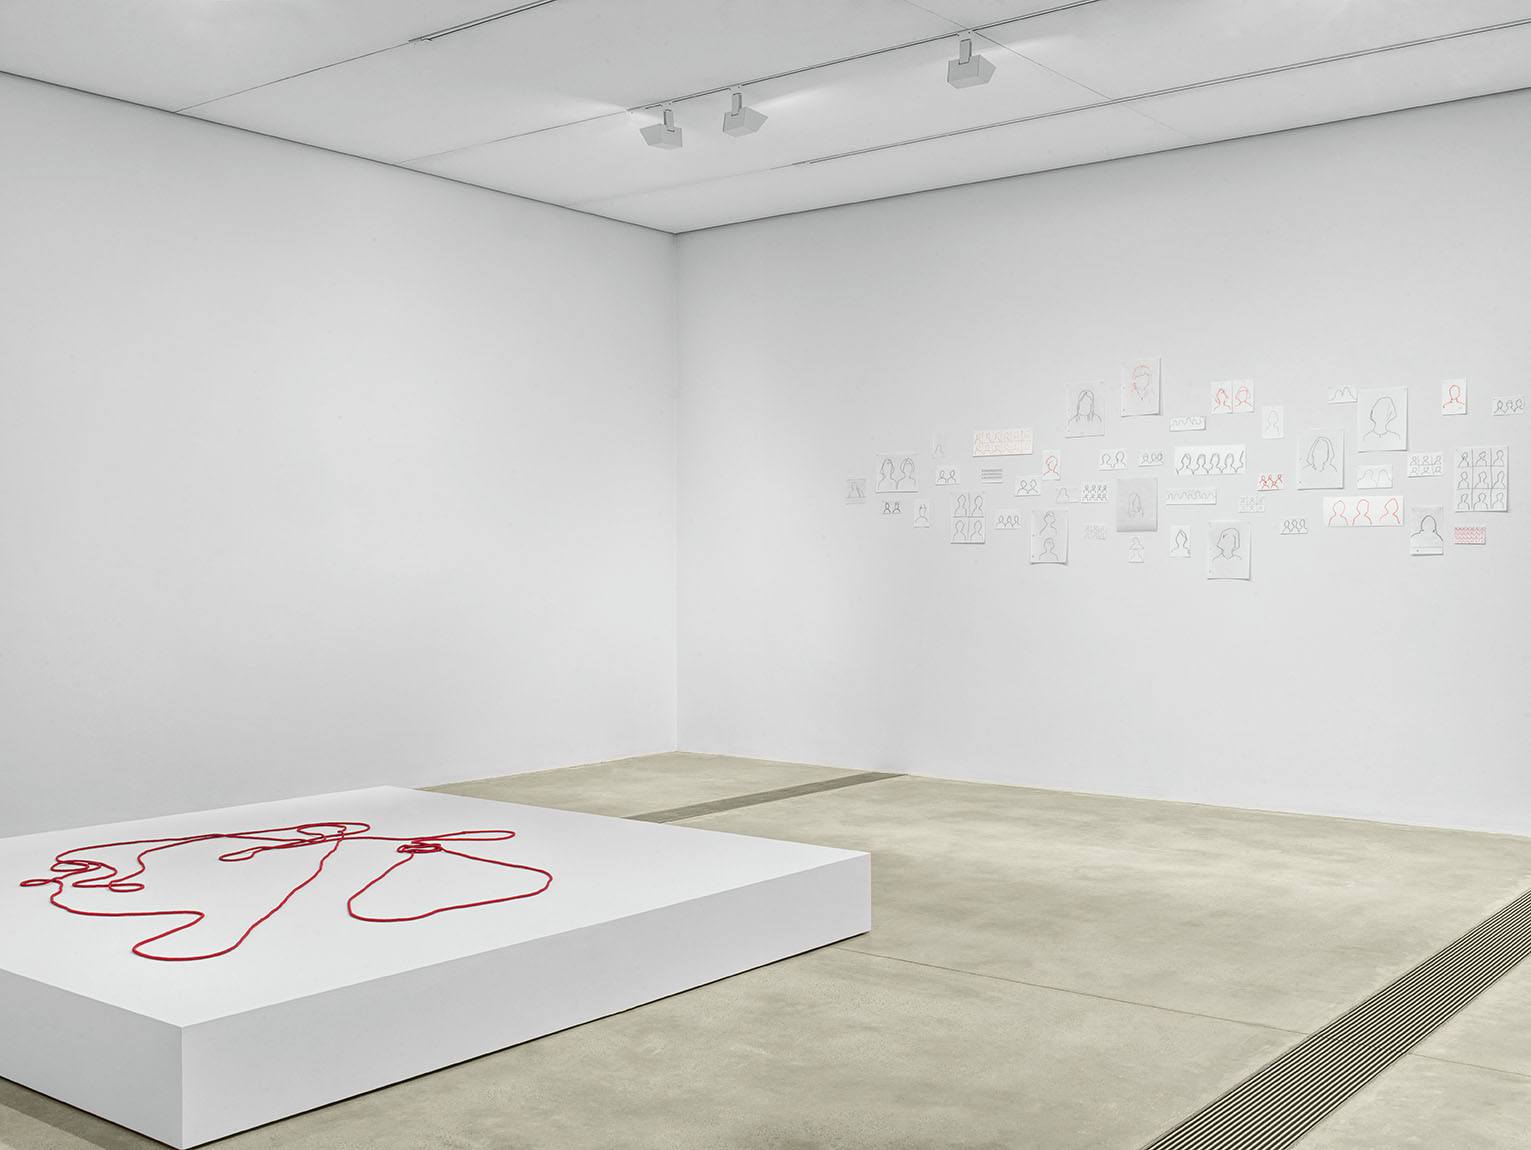 Red beaded rope displayed on white platform with several silhouette drawings posted on the wall to the right